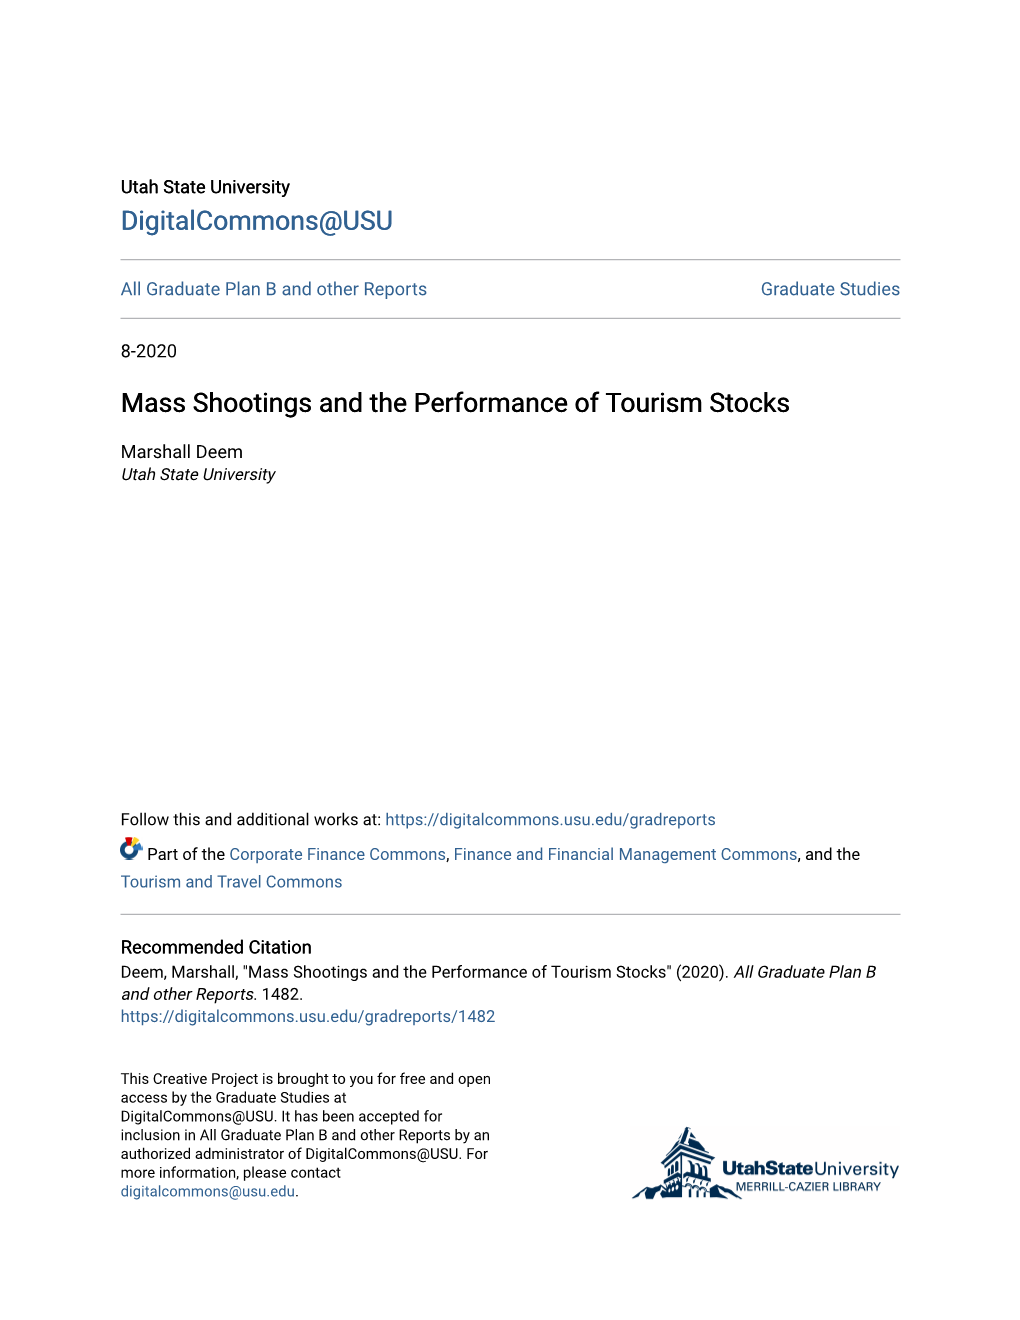 Mass Shootings and the Performance of Tourism Stocks